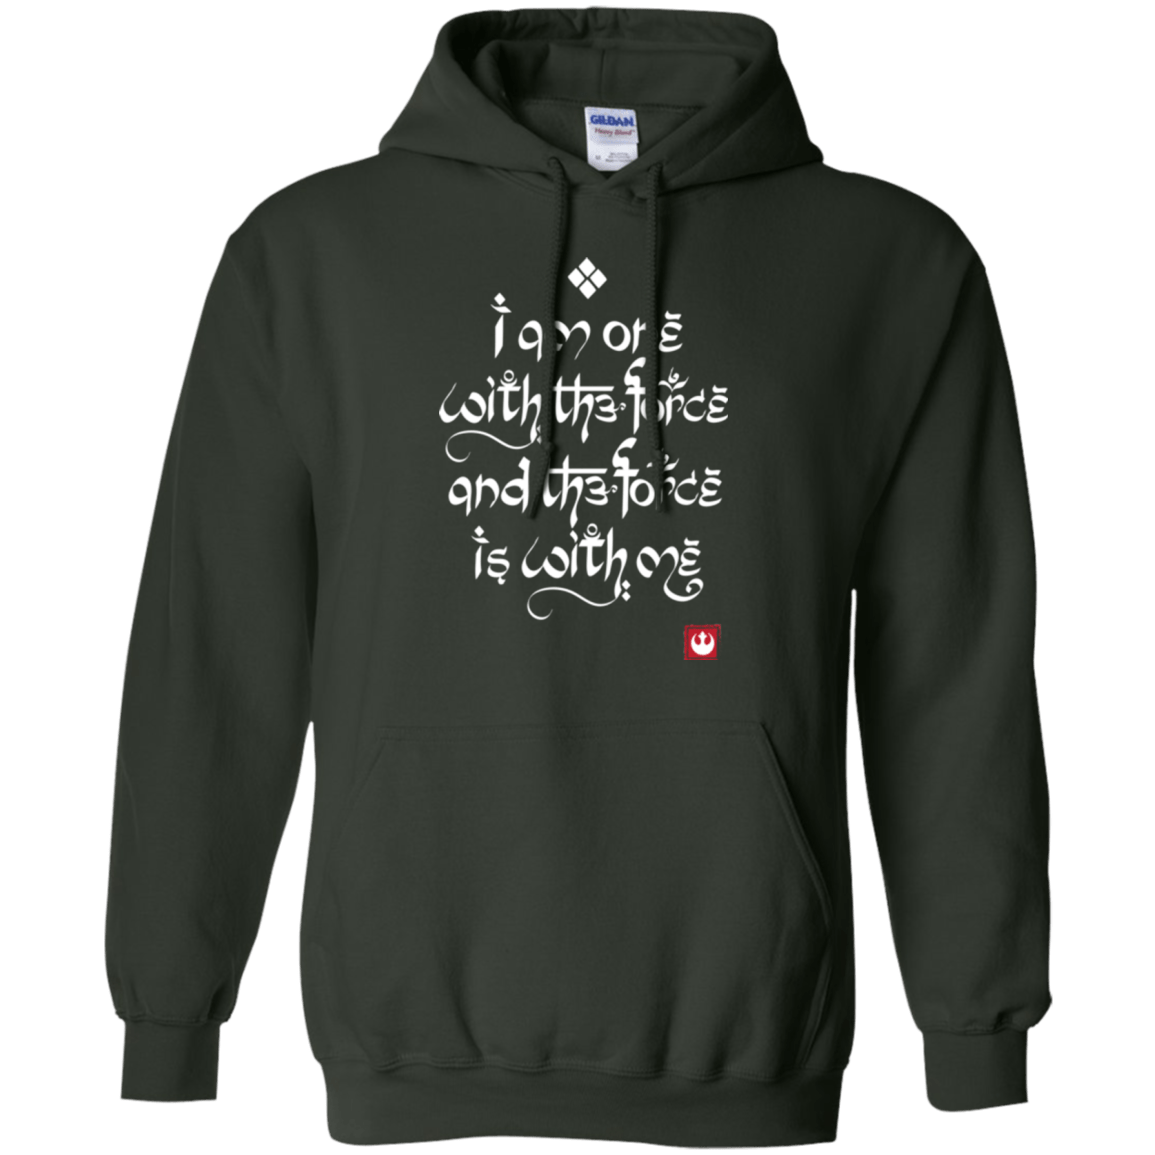 Sweatshirts Forest Green / Small Force Mantra White Pullover Hoodie